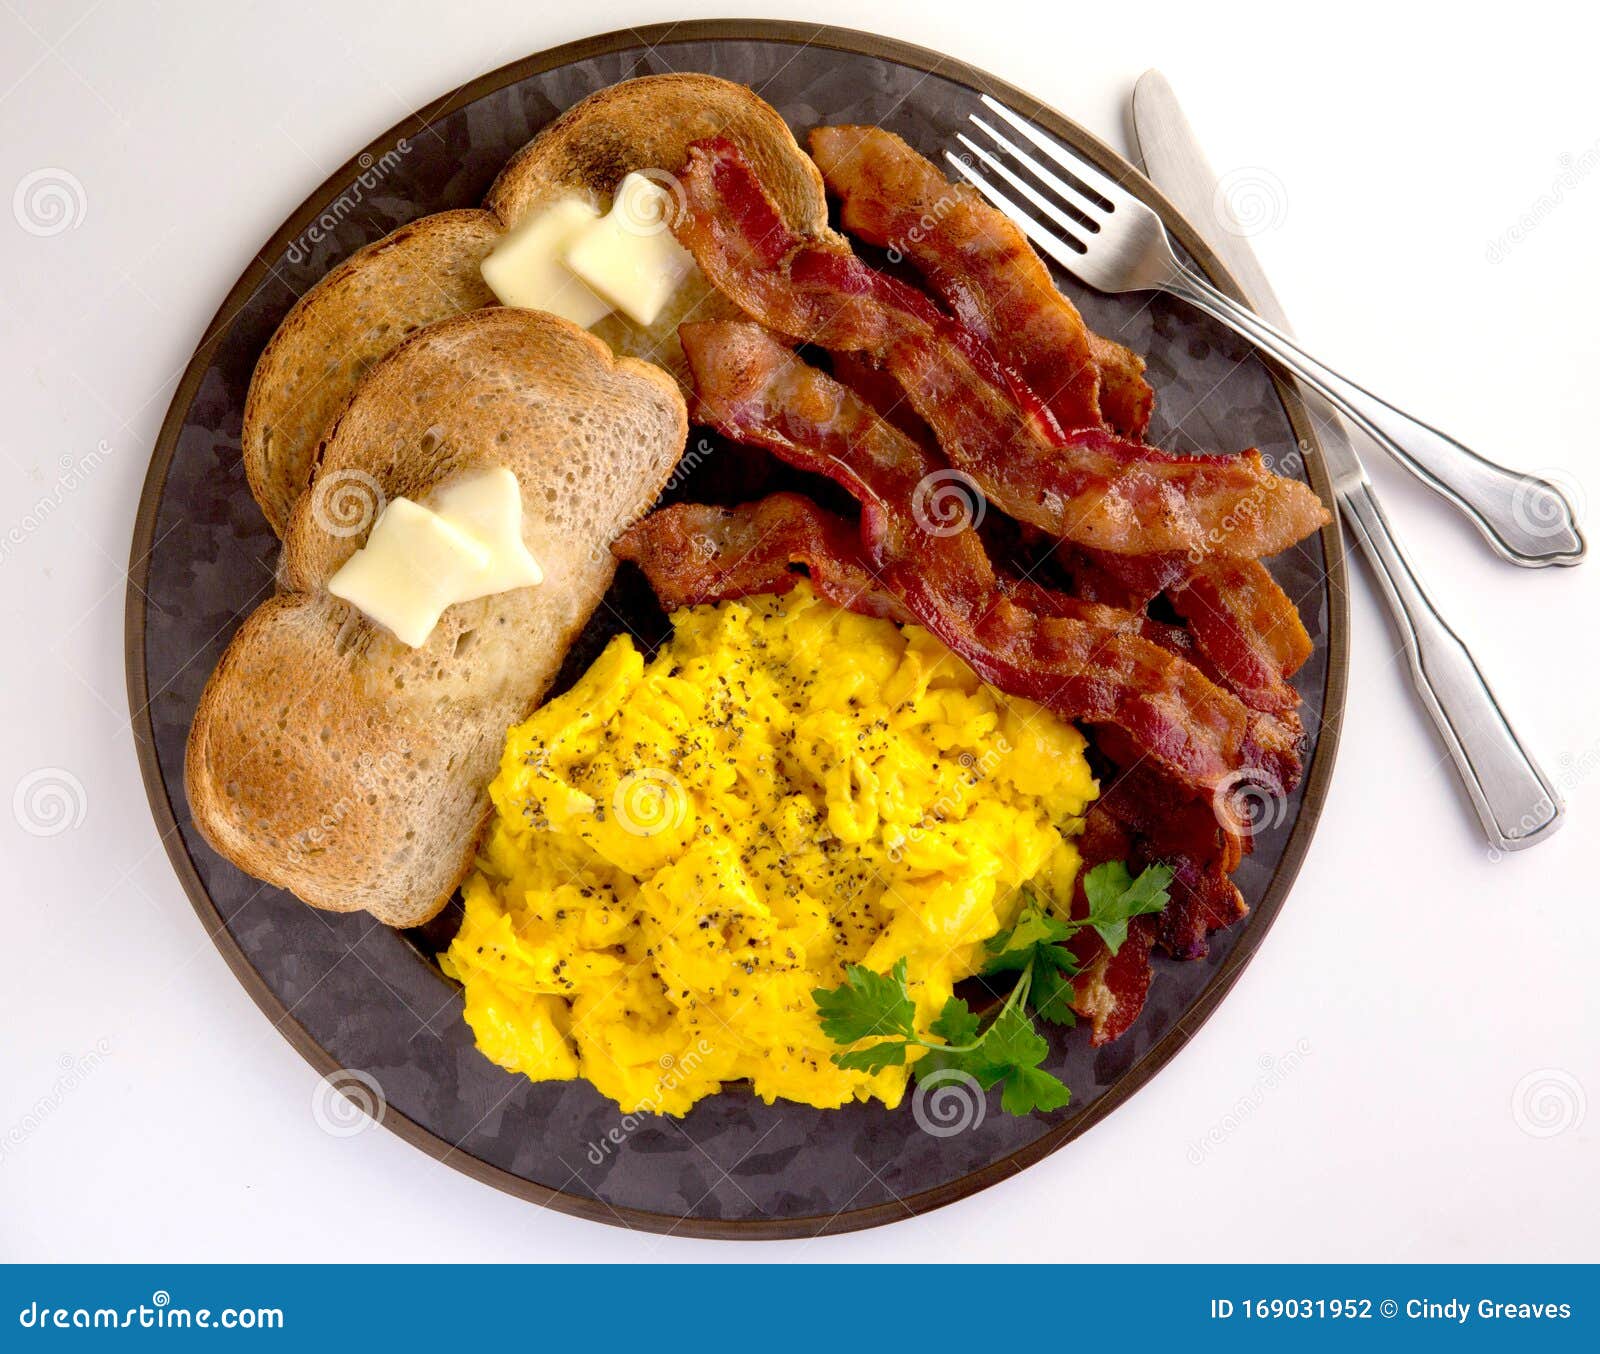 Bacon Scrambled Eggs And Toast On Tin Plate Stock Photo Image Of Meat Slices